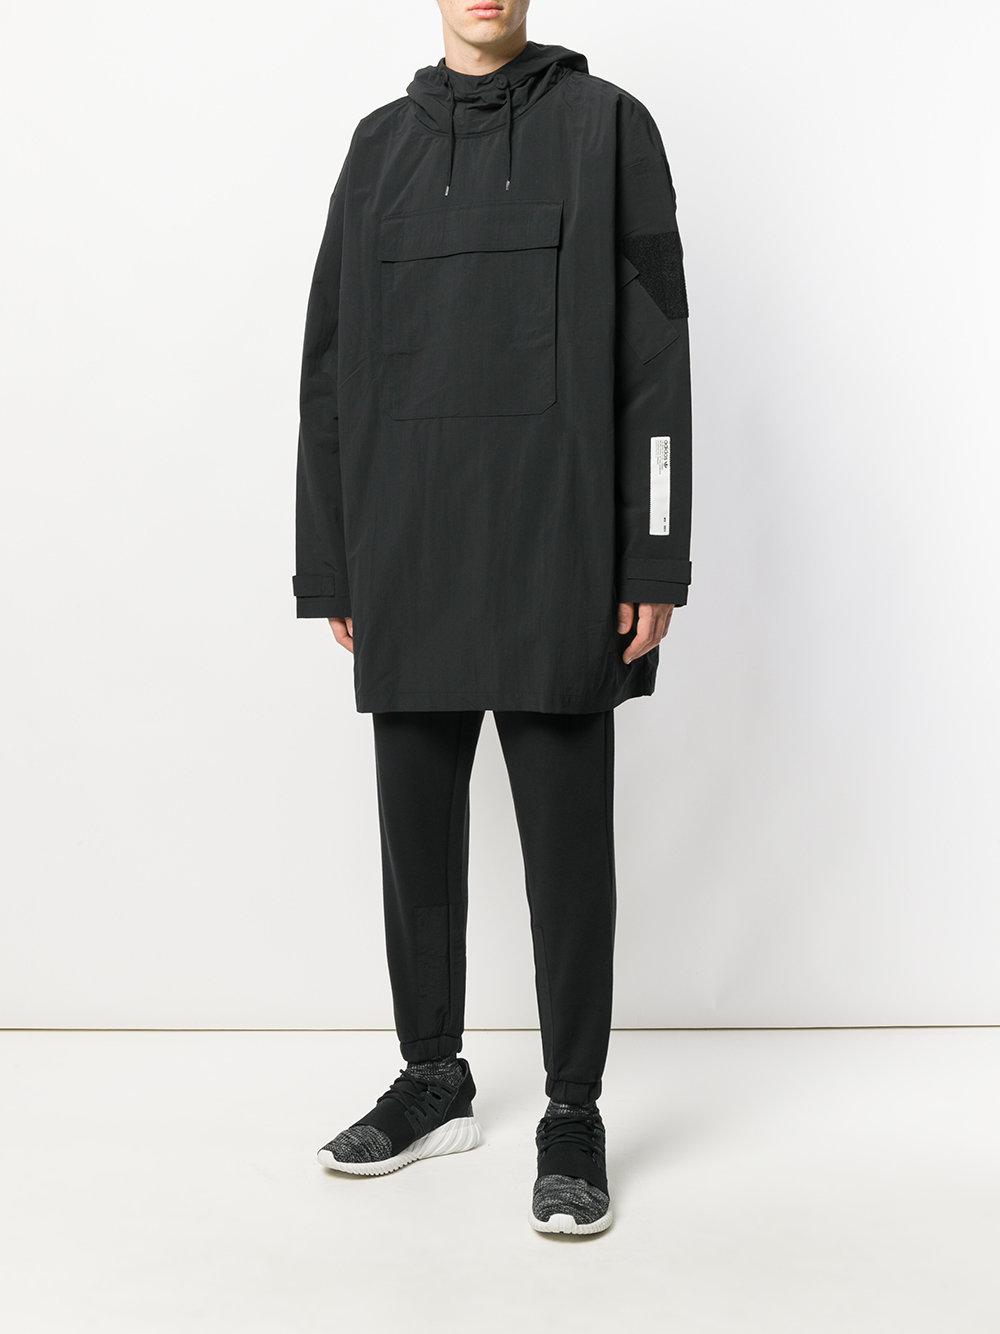 adidas Nmd Oversized Pullover Jacket in Black for Men - Lyst